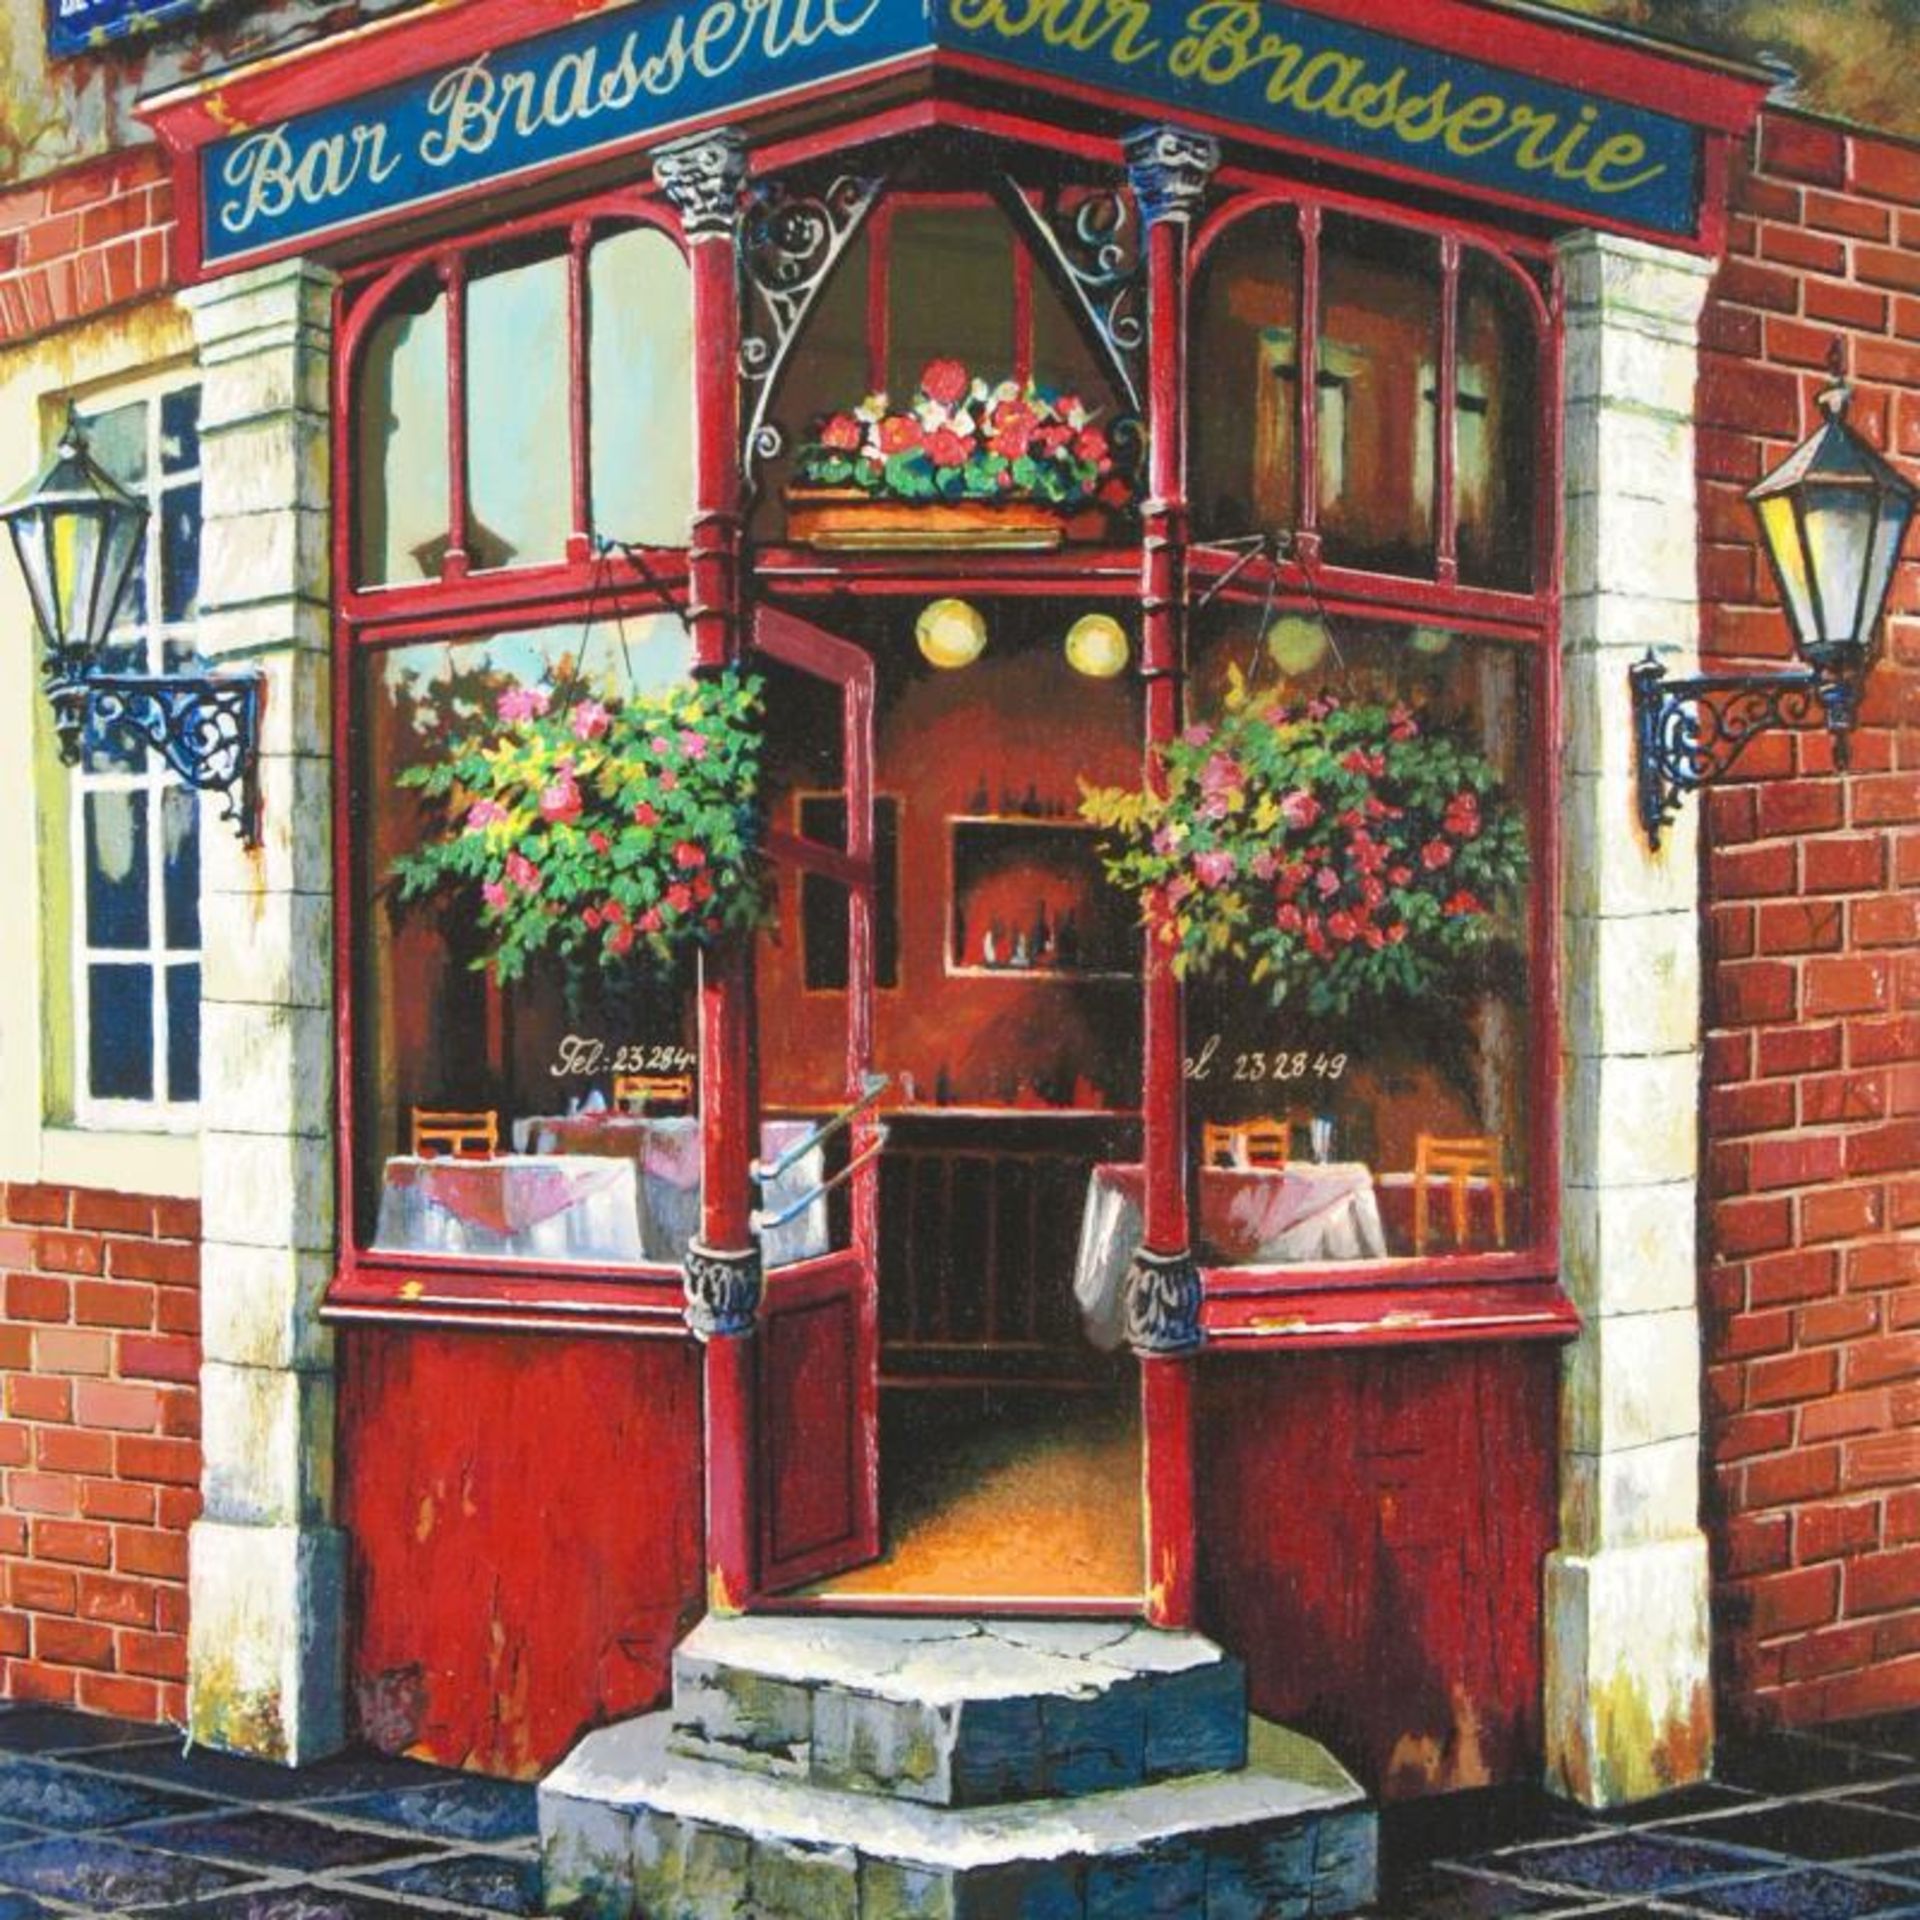 Anatoly Metlan, "Bar Brasserie" Limited Edition Serigraph, Numbered and Hand Sig - Image 2 of 2